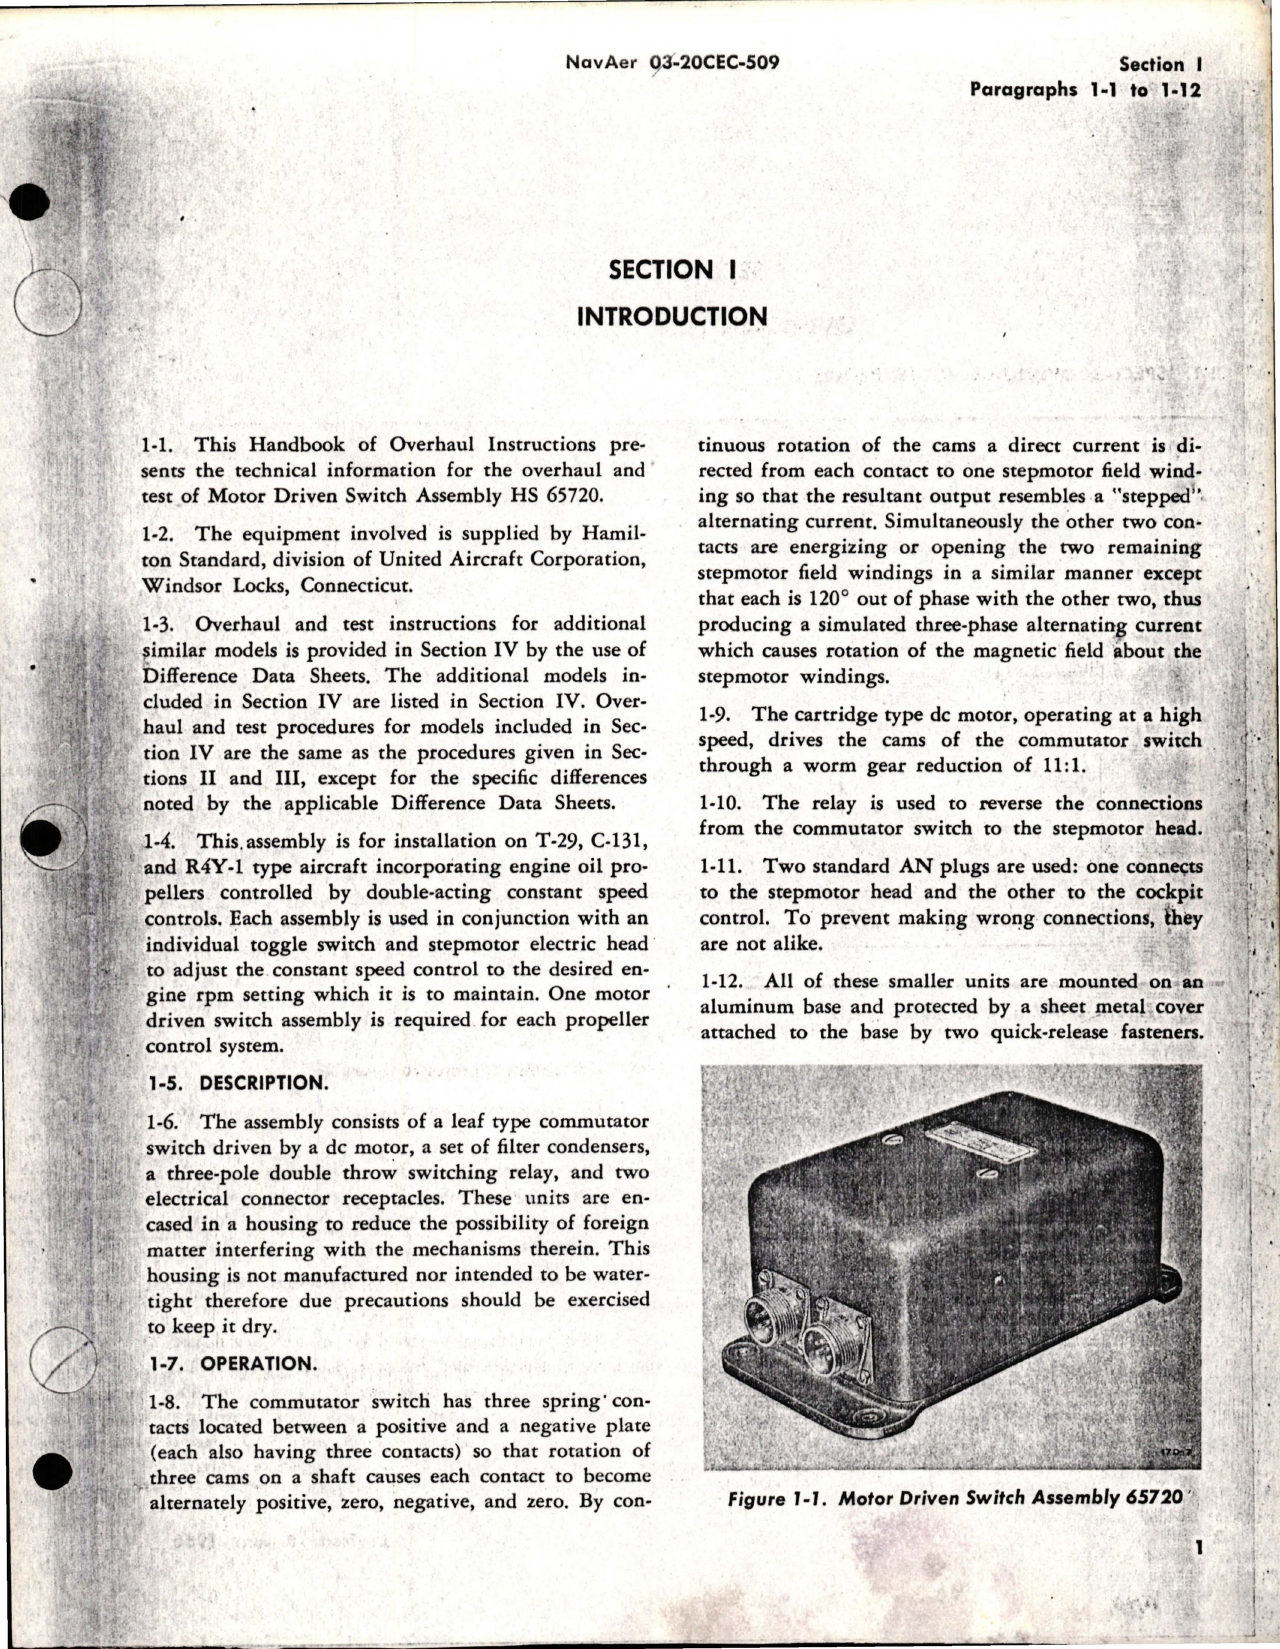 Sample page 5 from AirCorps Library document: Overhaul Instructions for Motor Driven Switch - Assembly No. 65720 and 69009